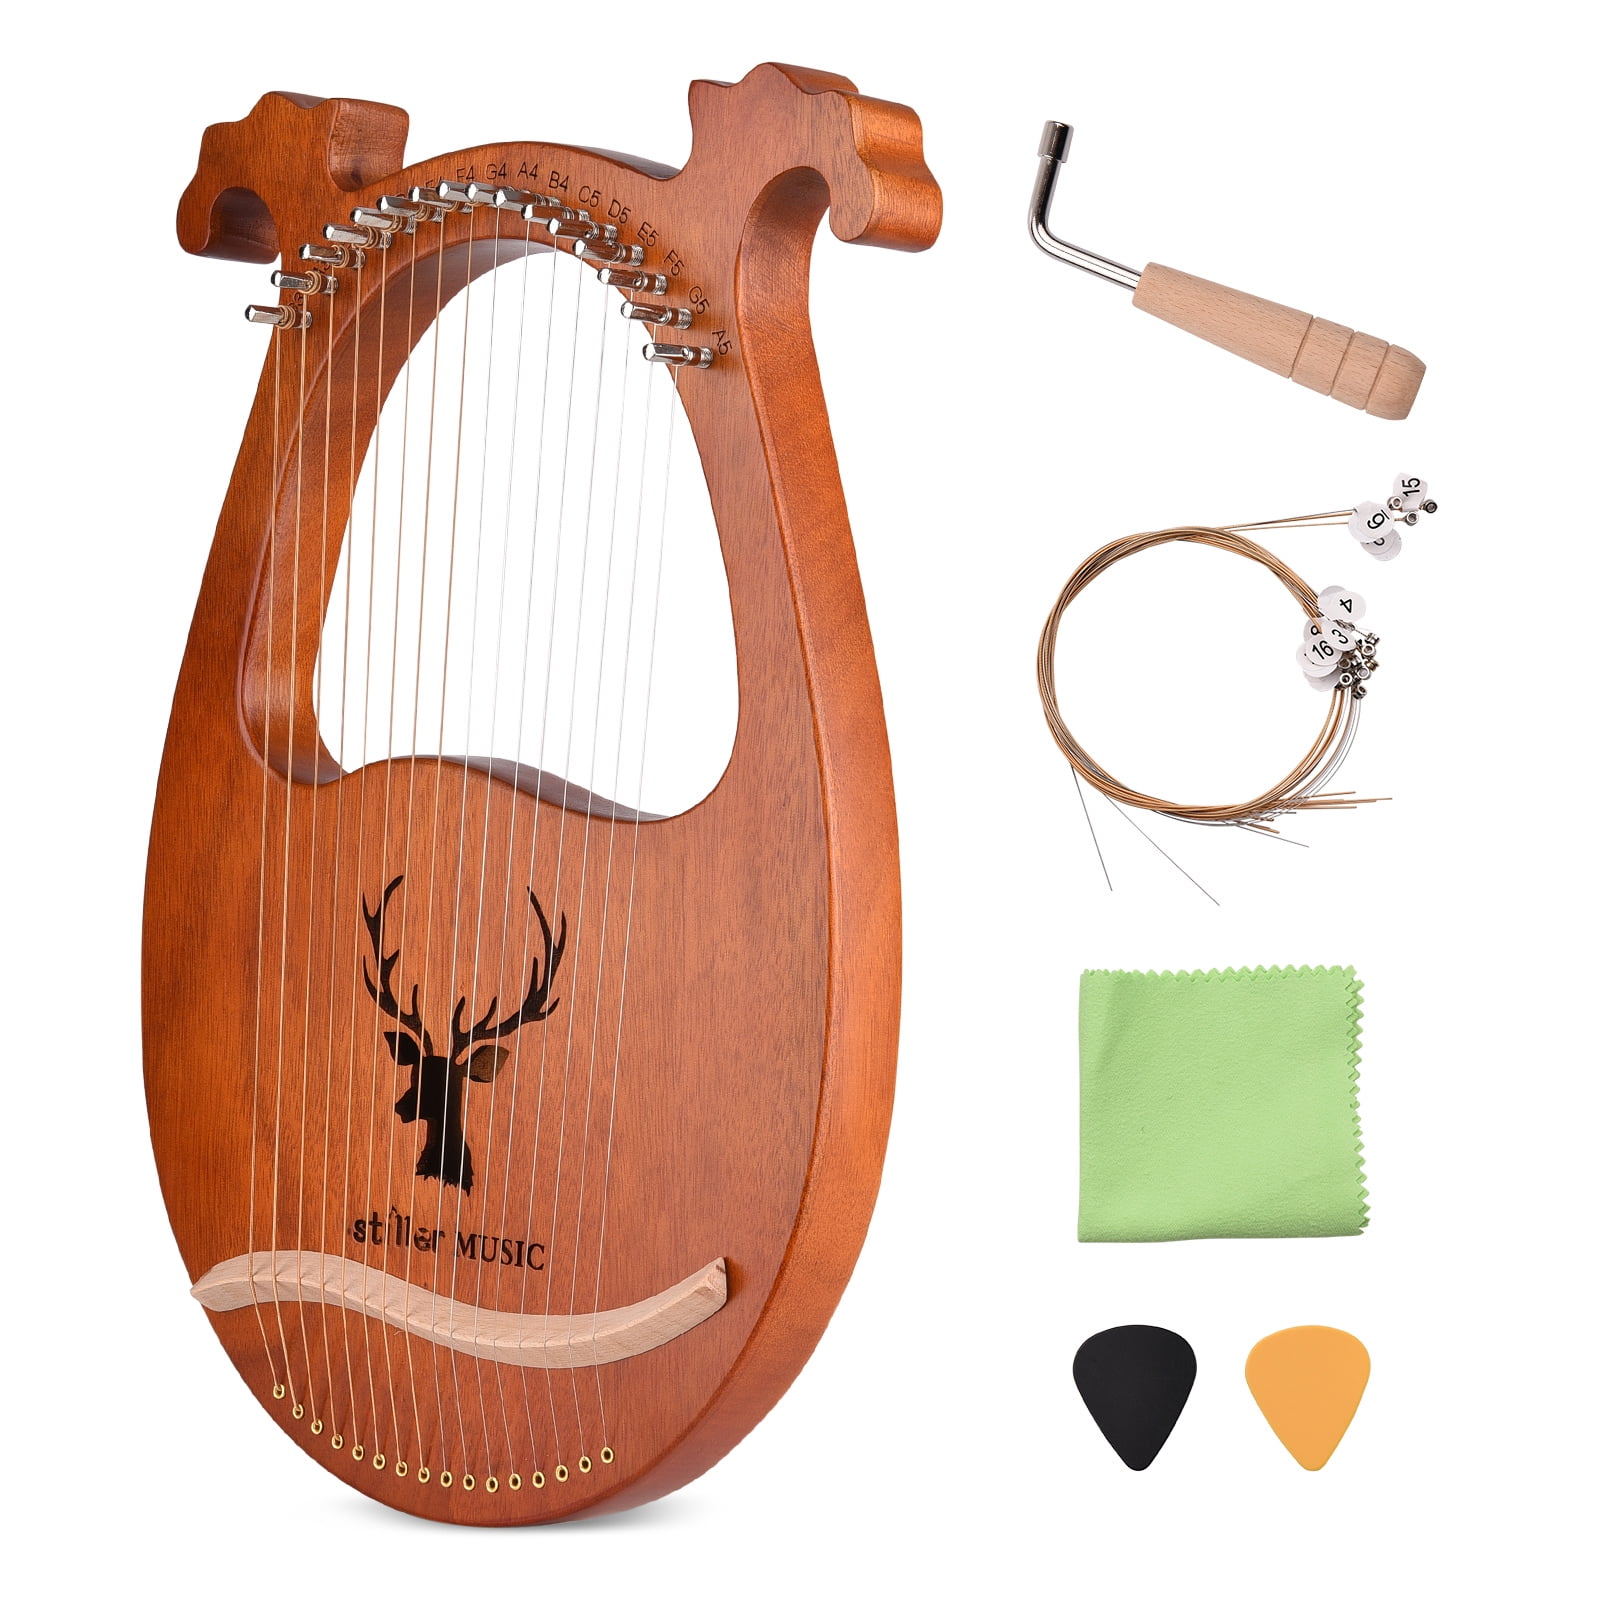 16 String Beginner Small Harp Mahogany Harp with Storage Bag Original Strings and Cleaning Cloth for Plucked string instrument Learning 